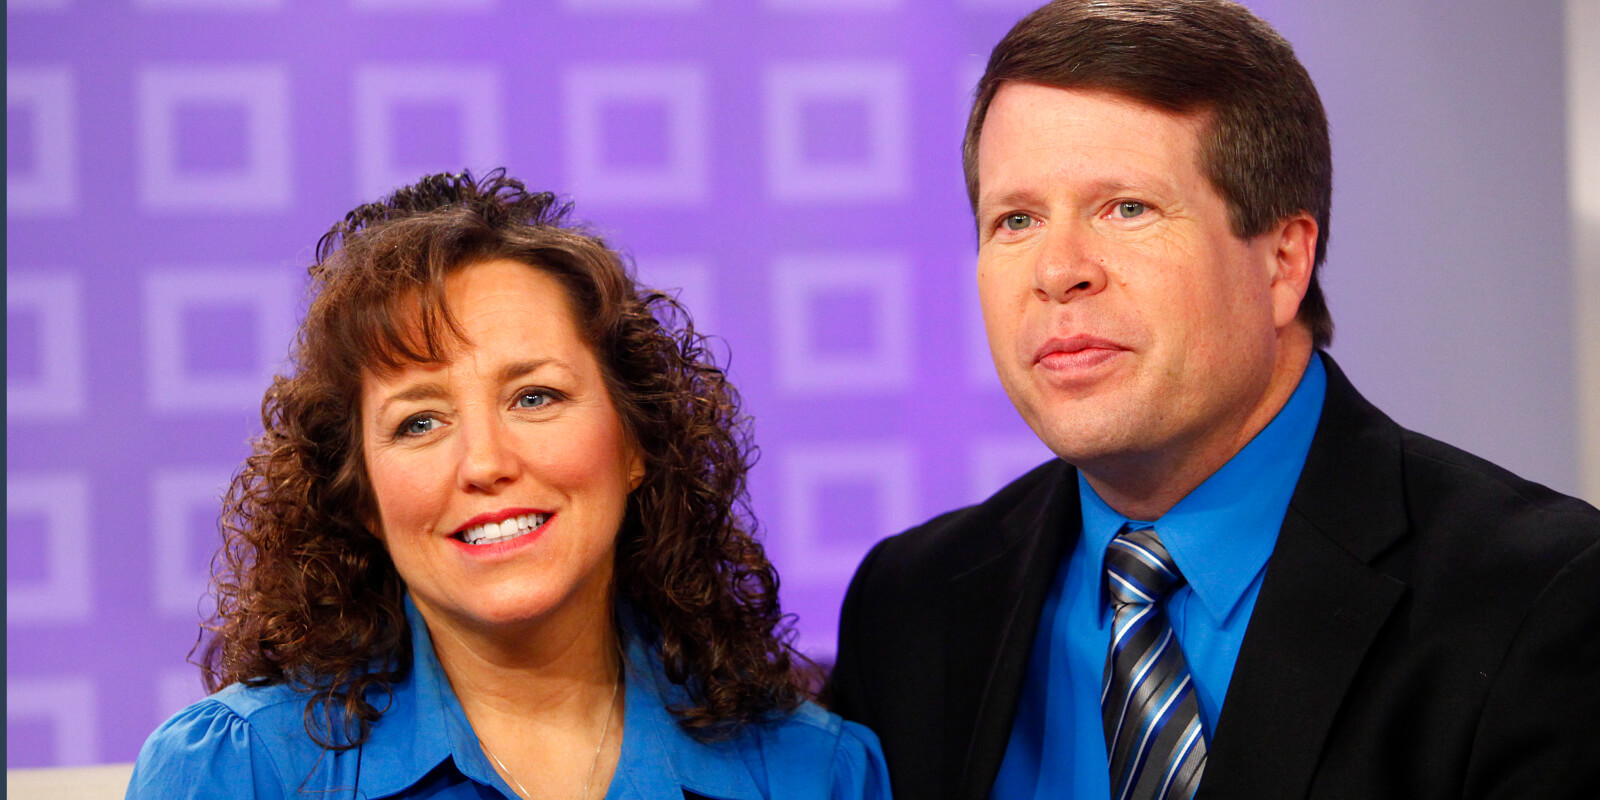 Michelle and Jim Bob Duggar pose during an interview for the 'Today' show.